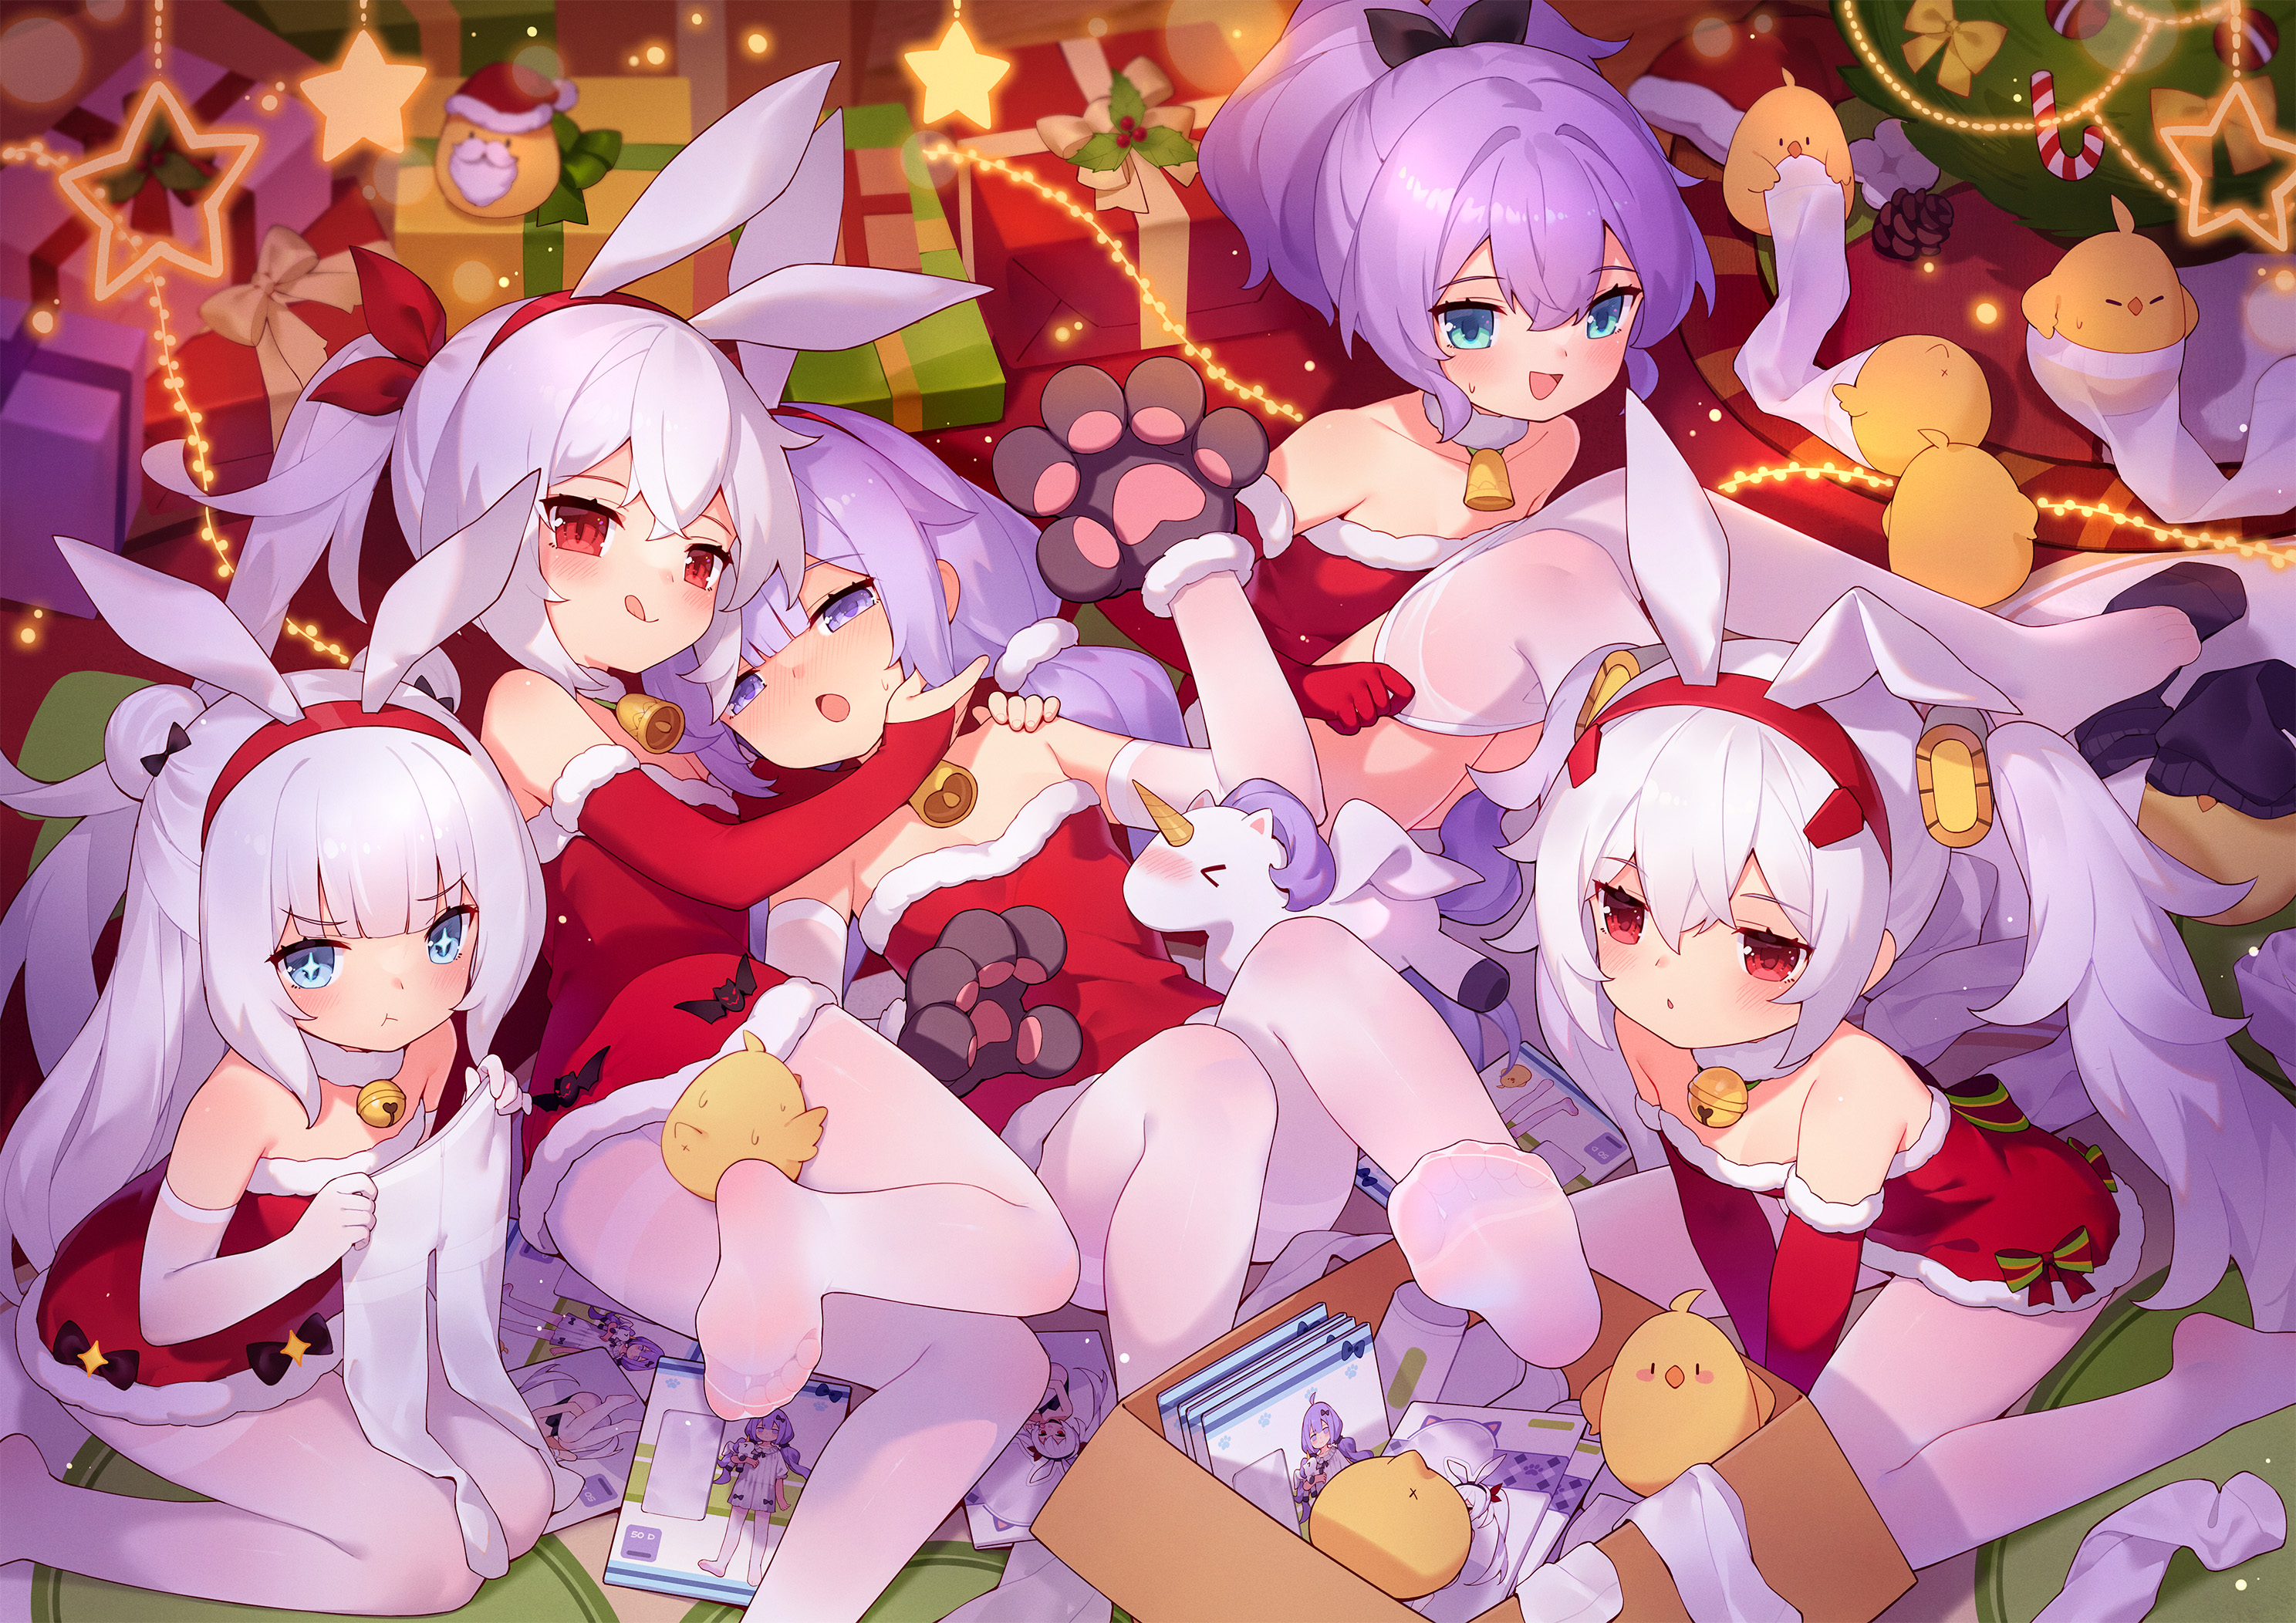 Anime 2976x2104 Pixiv anime anime girls Christmas Christmas presents Christmas clothes blushing long hair pantyhose feet looking at viewer presents cat gloves bunny ears bow tie Christmas tree sweatdrop loli bells pony Christmas ornaments 